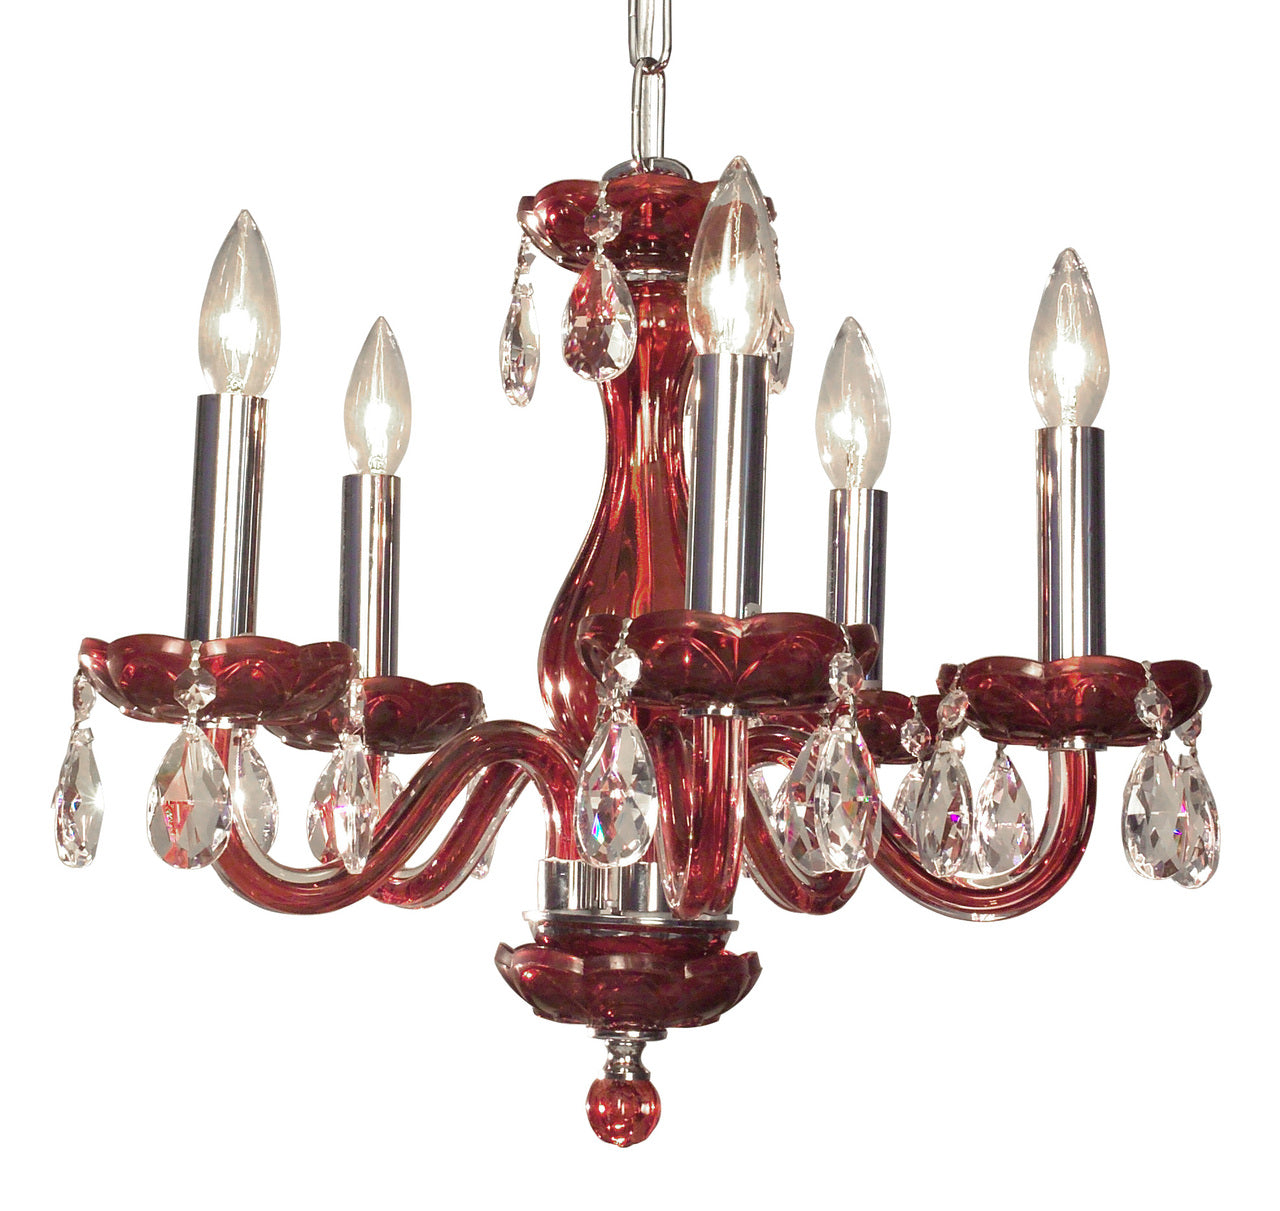 Classic Lighting 82045 RED CPFR Monaco Crystal Chandelier in Red (Imported from Spain)